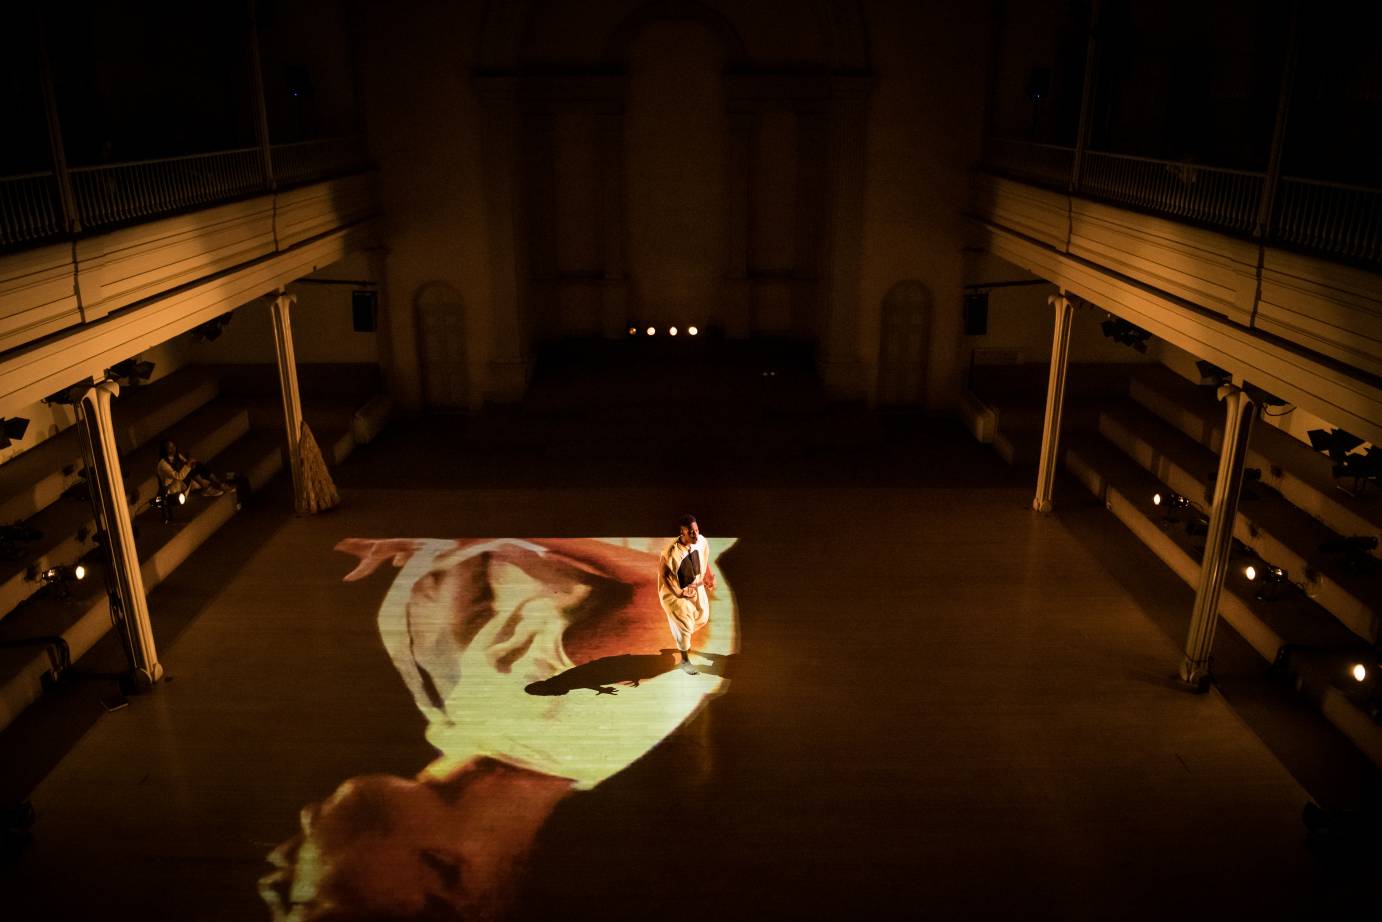 A dancer stands on top of a projection of a face